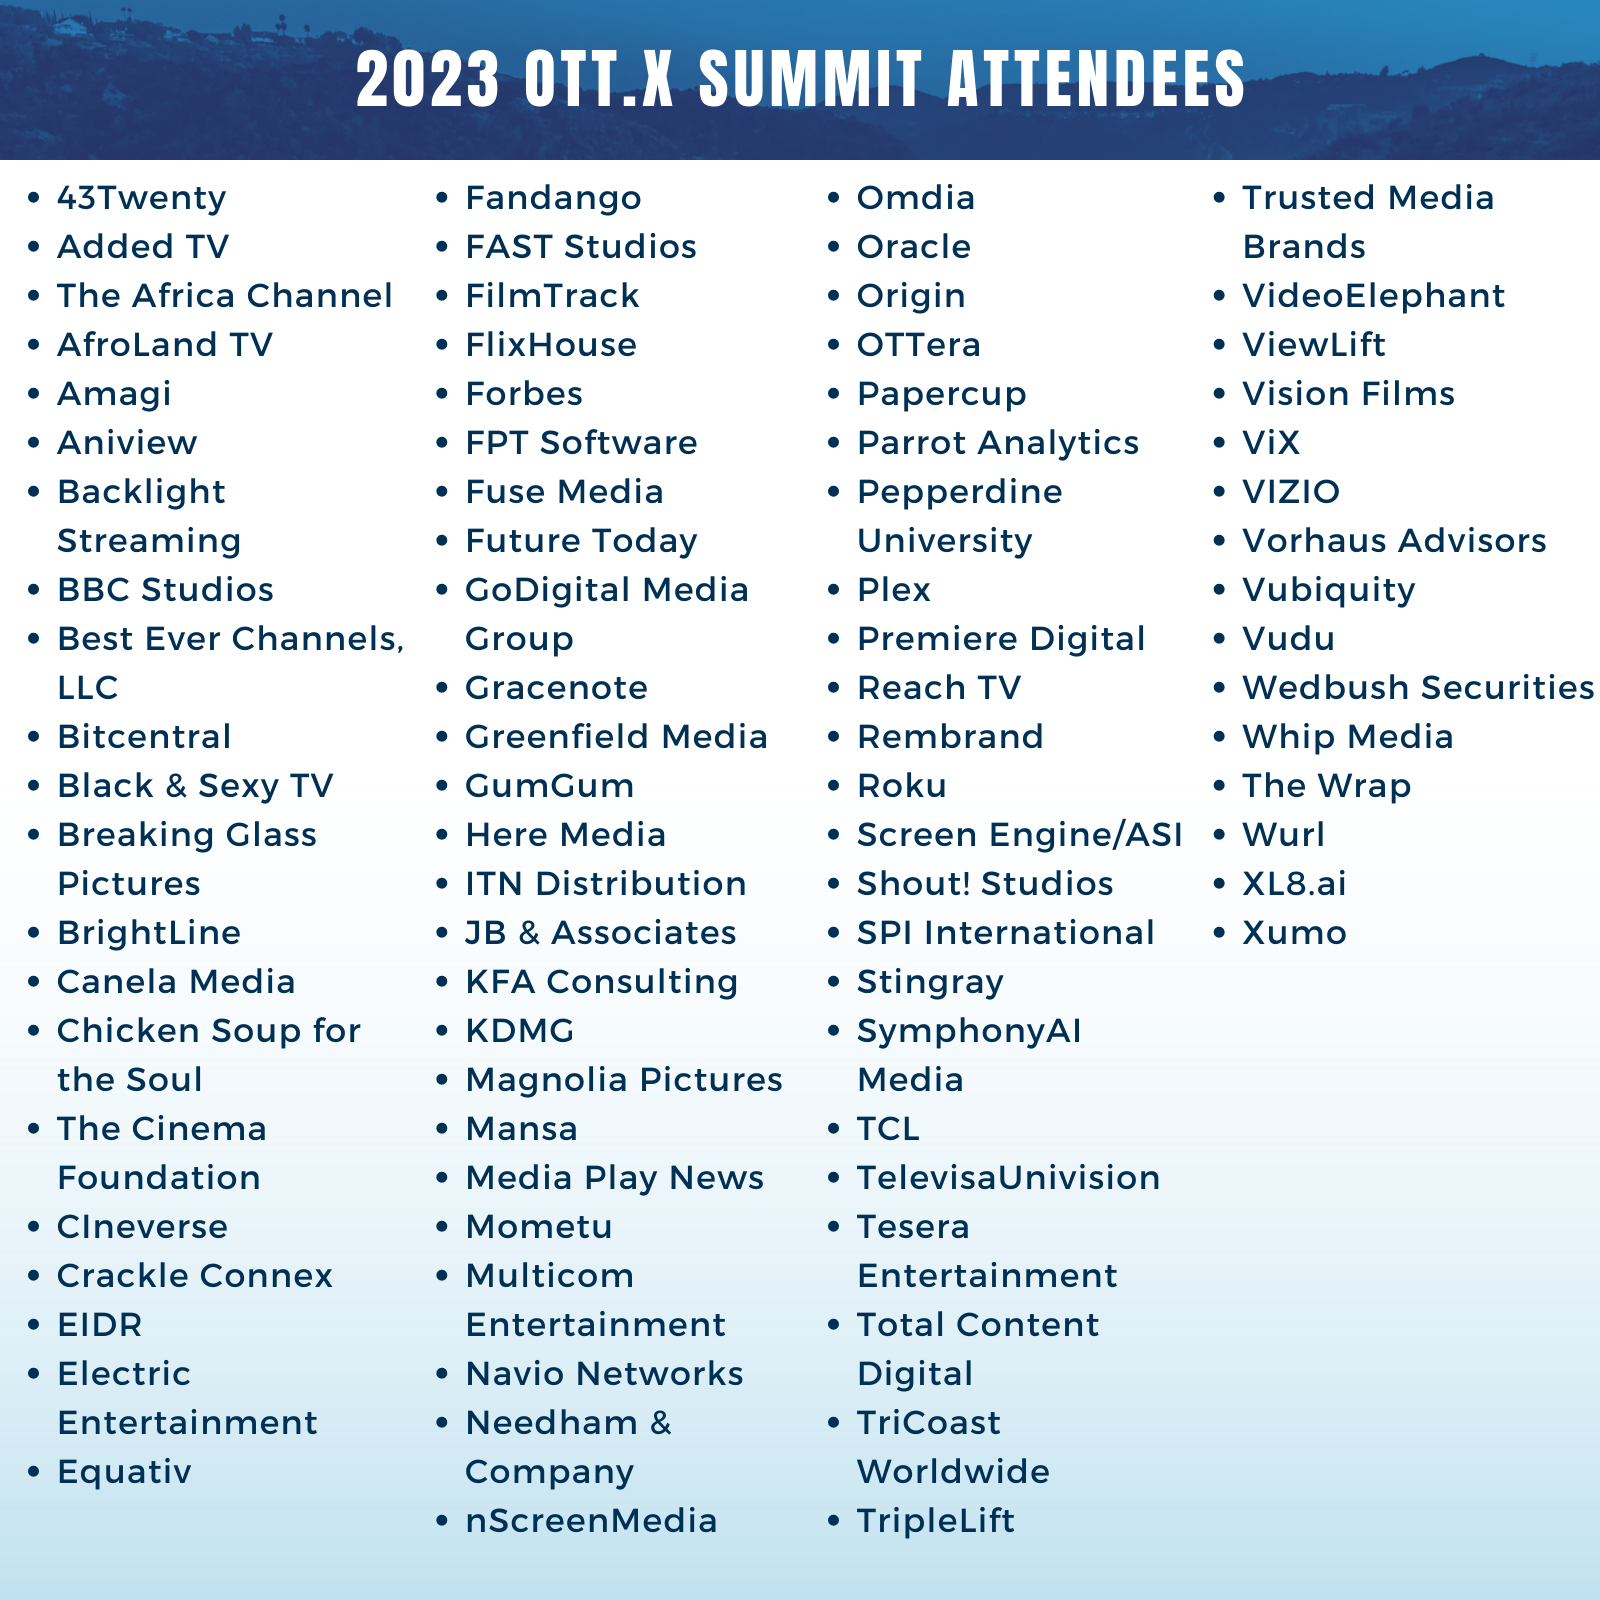 23 Summit Participating Orgs